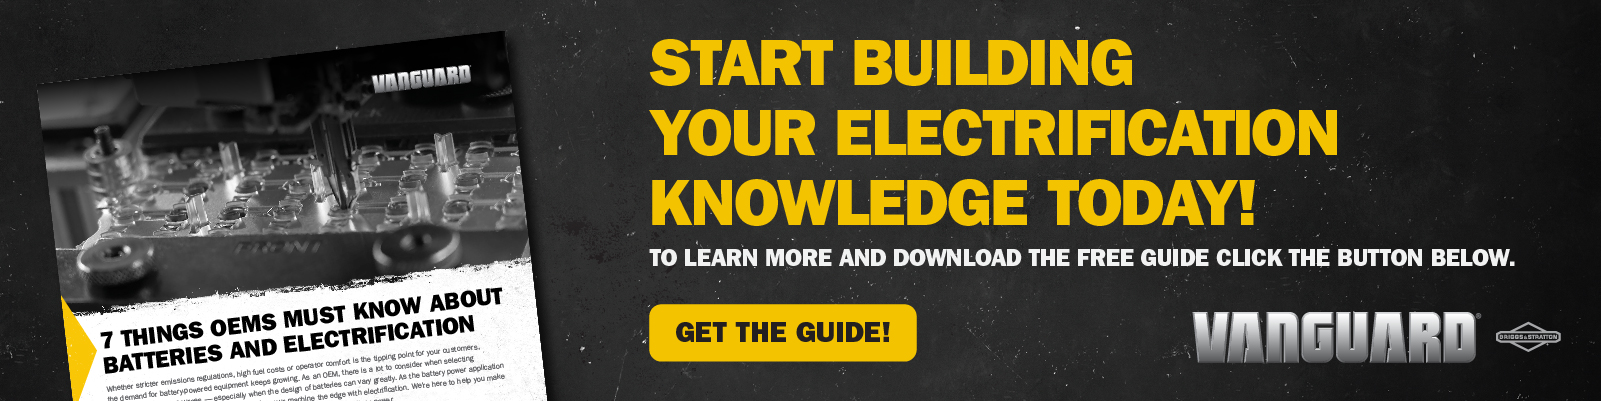 Start Building Your Electrification Knowledge Today! Click here to download the guide.